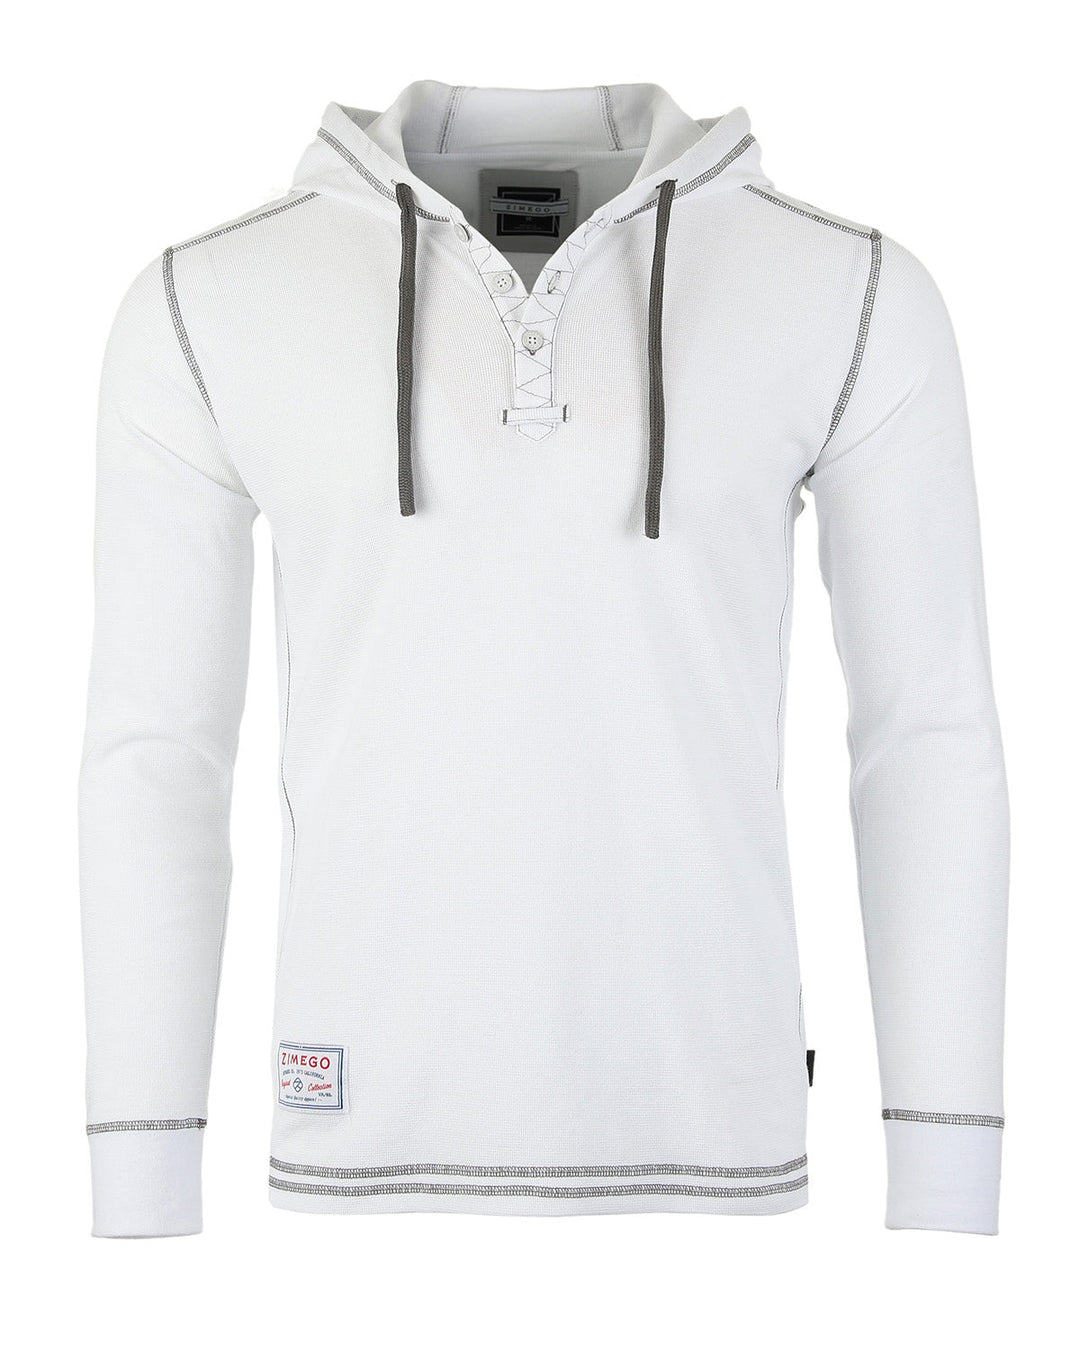 White Men's Thermal Long Sleeve Lightweight Fashion Hooded Henley